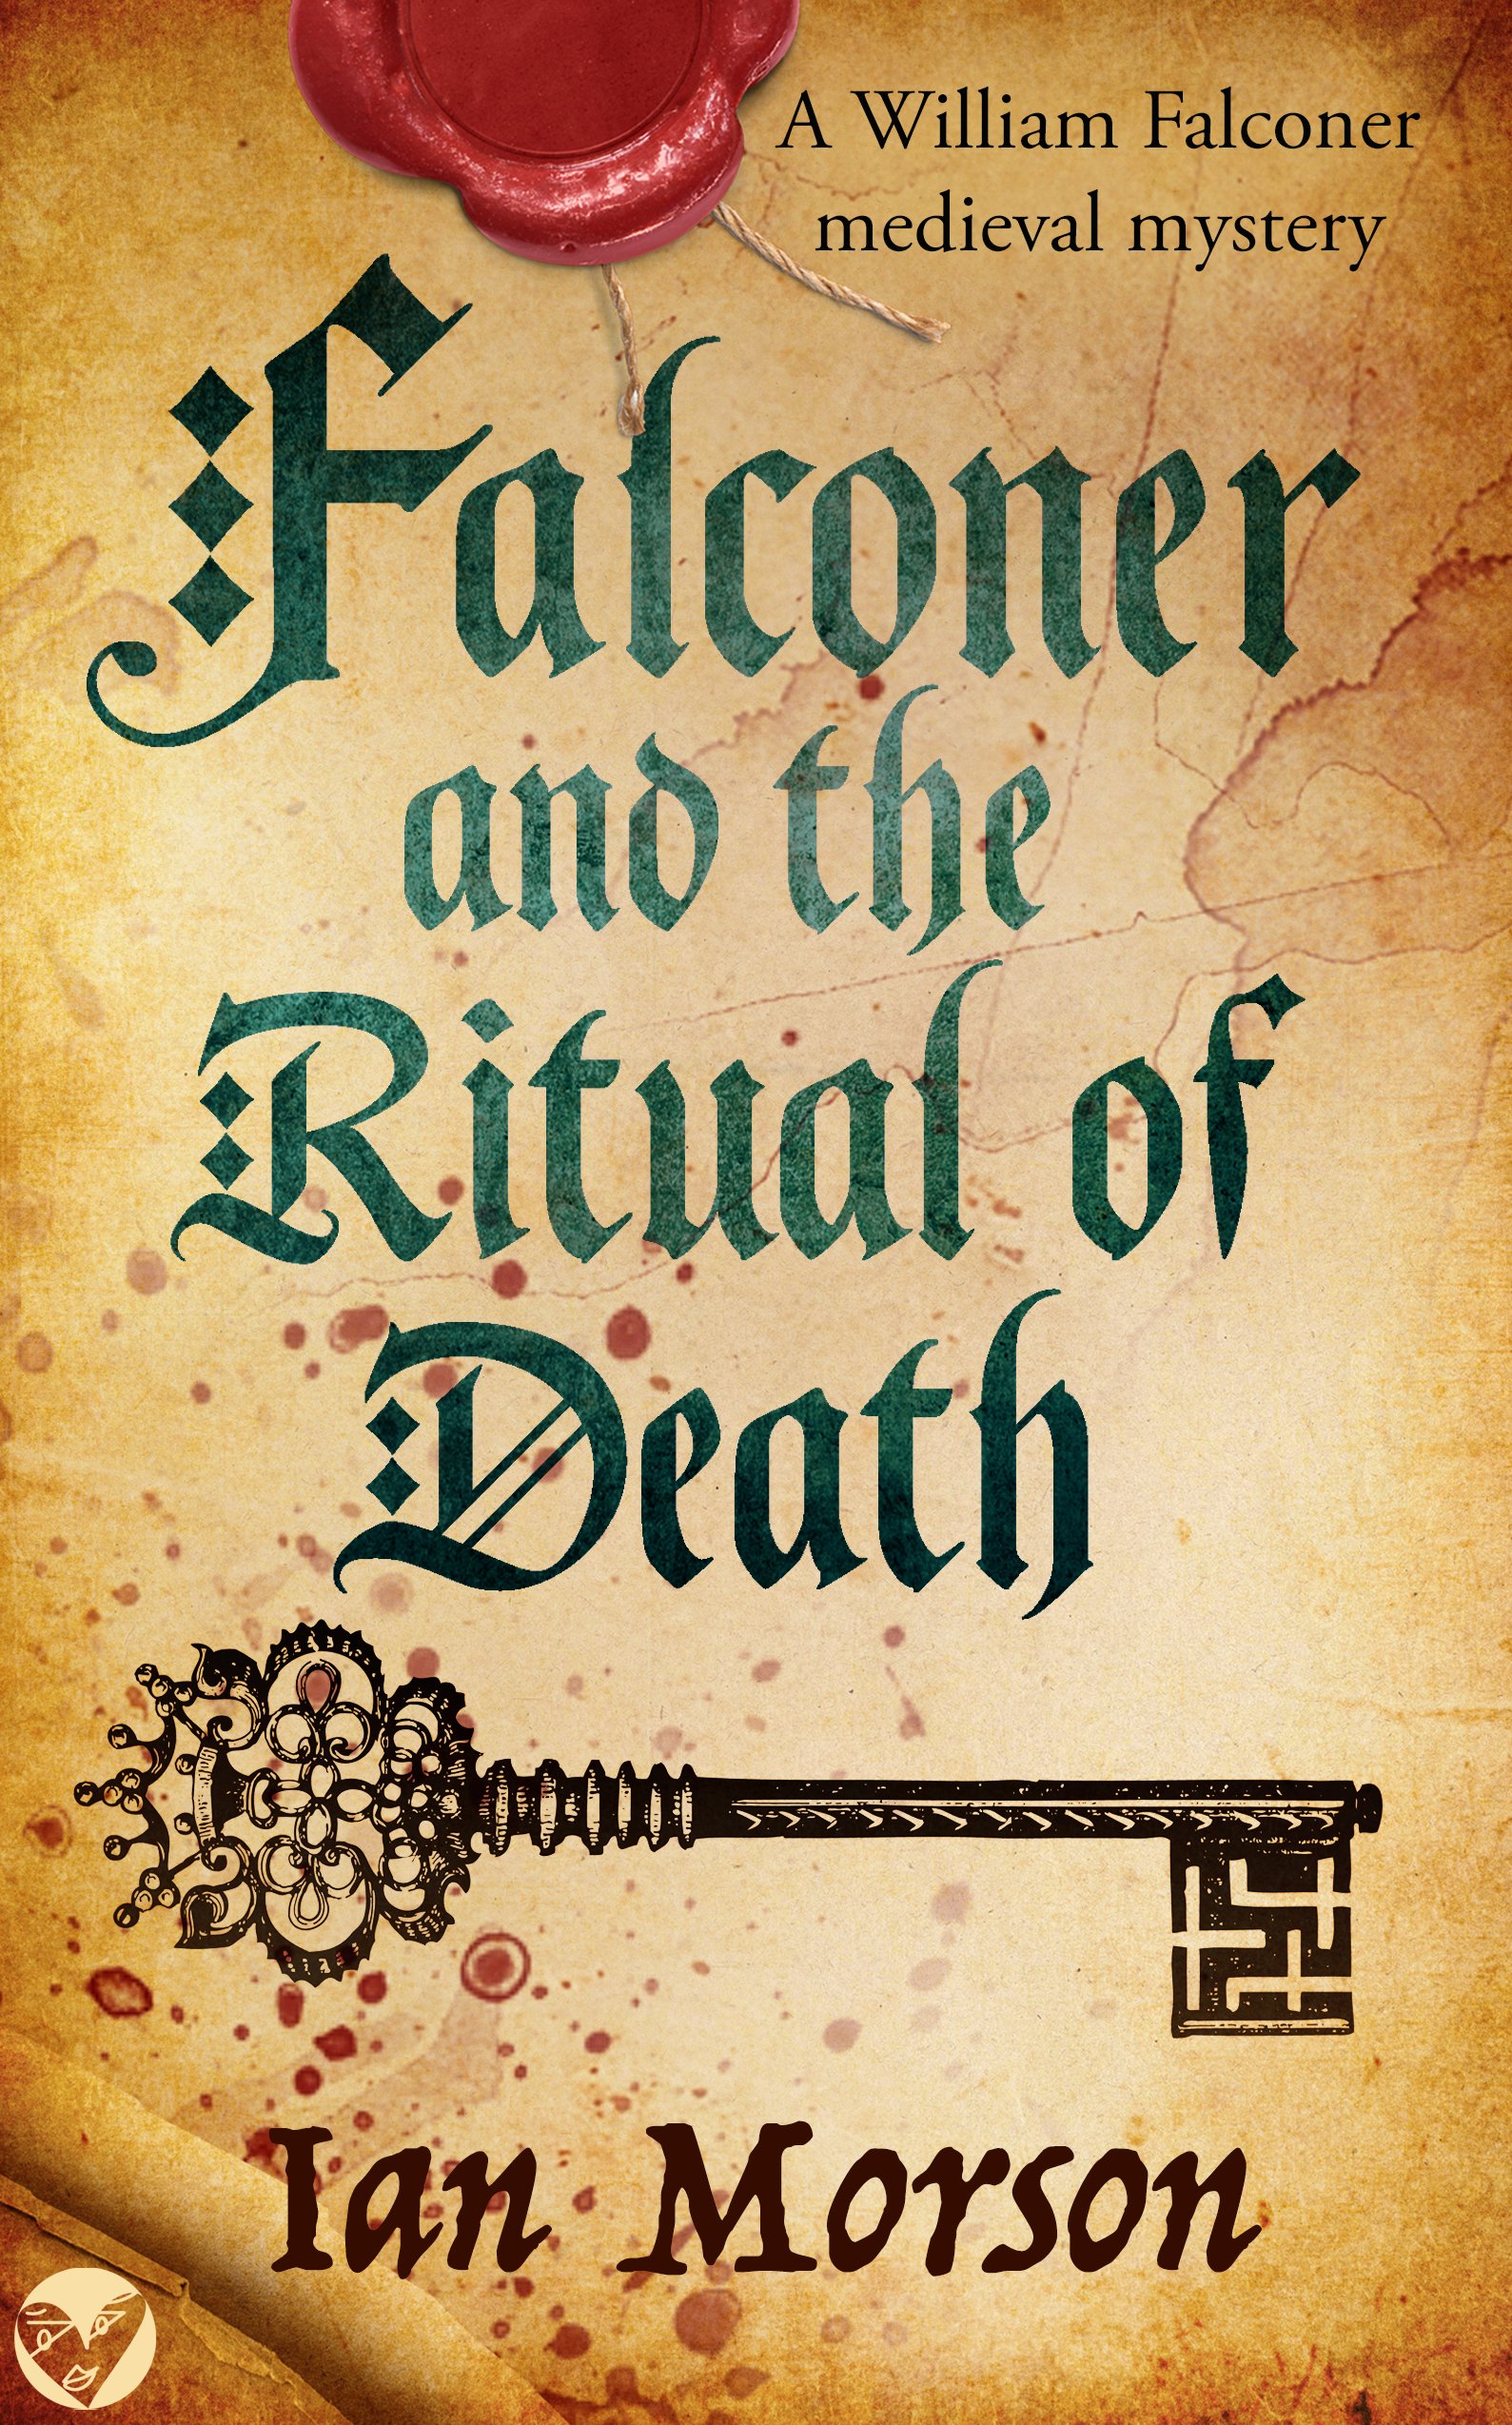 FALCONER AND THE RITUAL OF DEATH Cover publish.jpg